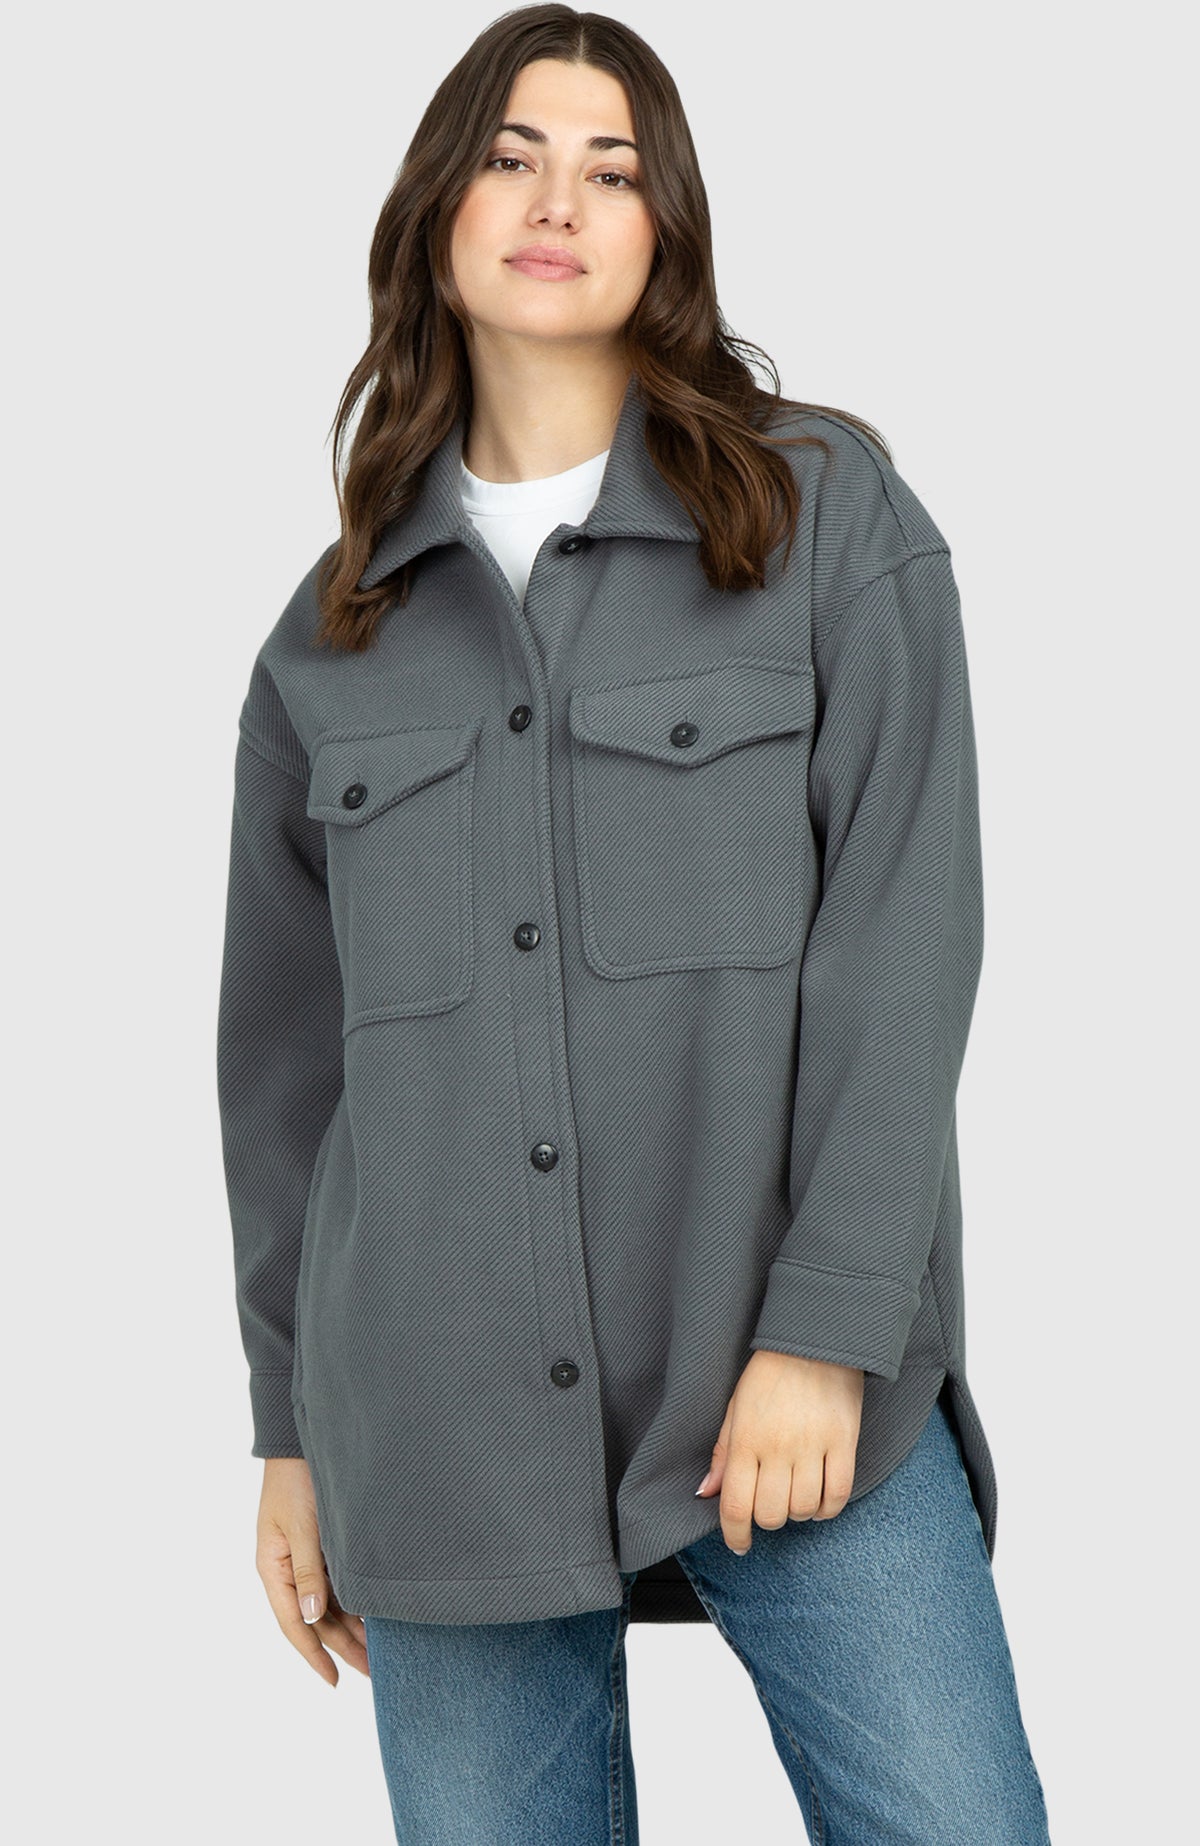 Slate Grey Oversized Twill Knit Shacket for Women - Front Buttoned Up